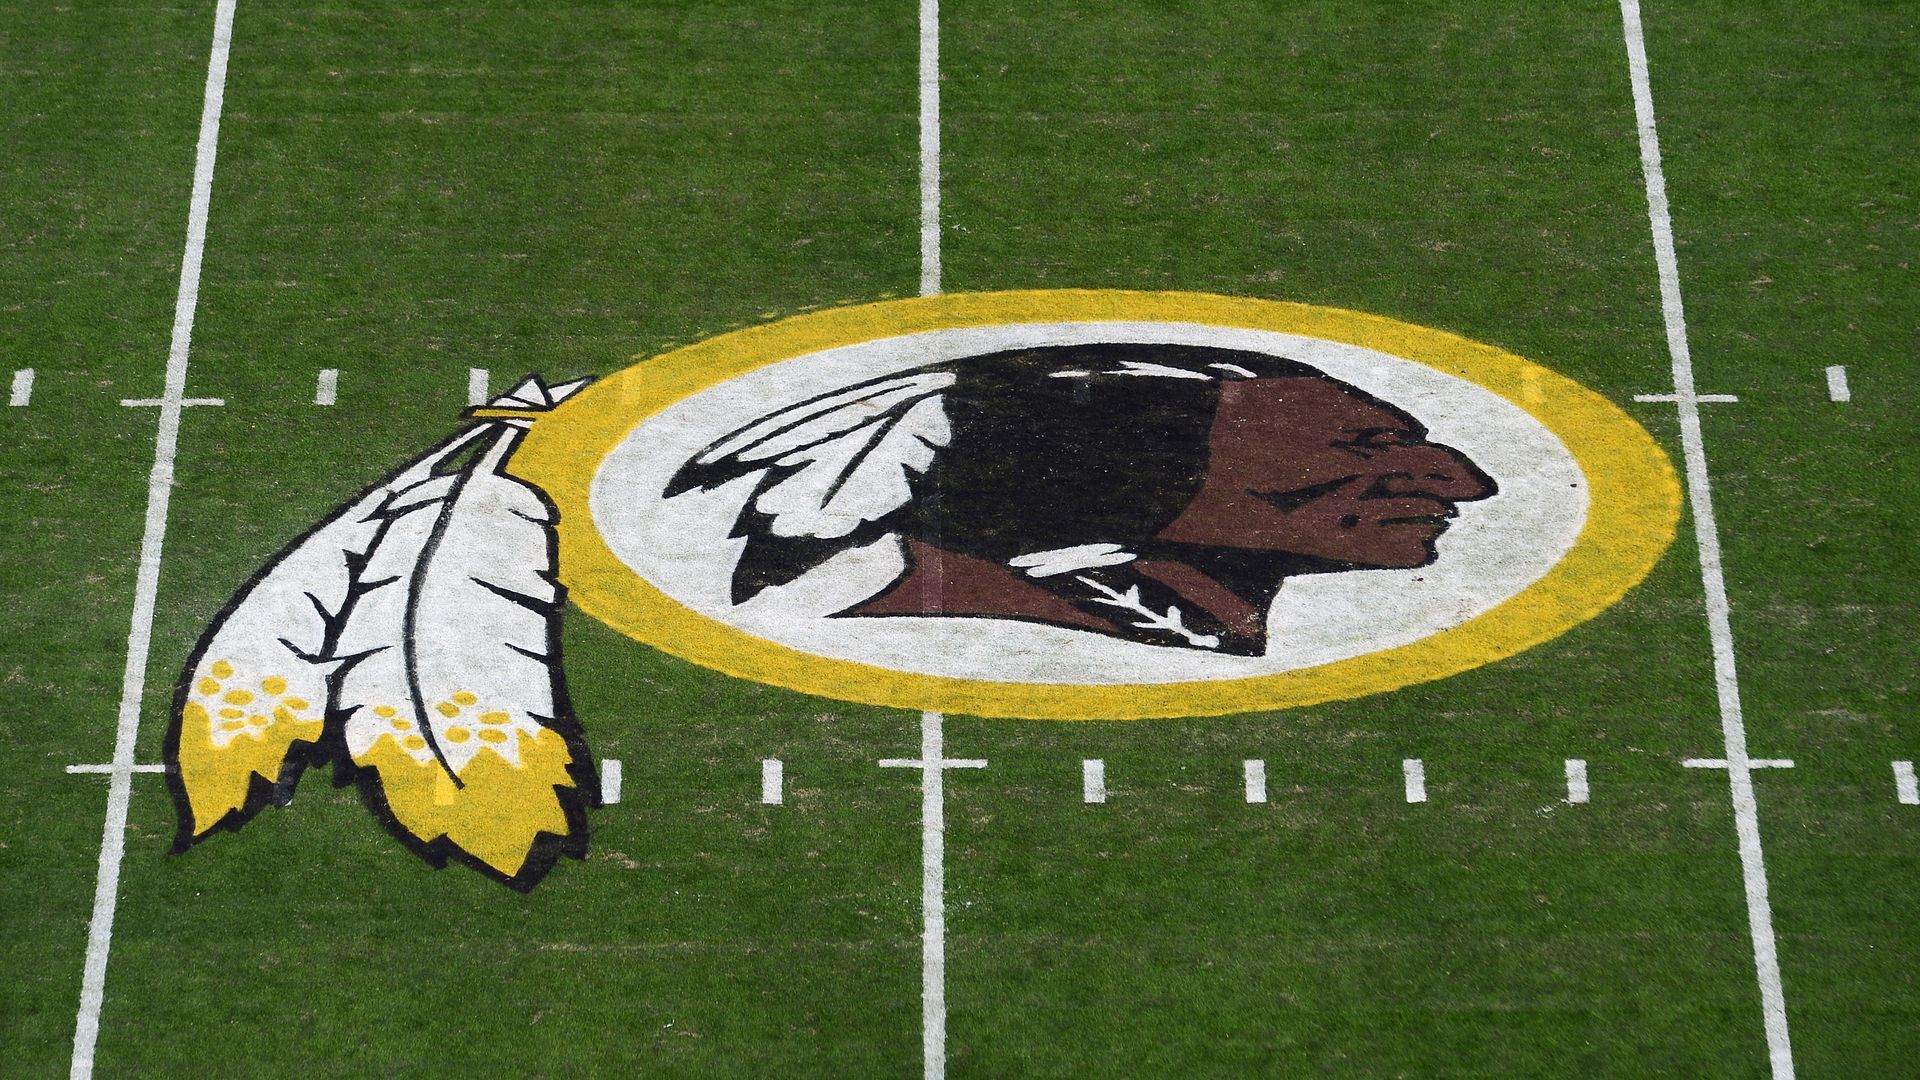 The Redskins logo on a field.